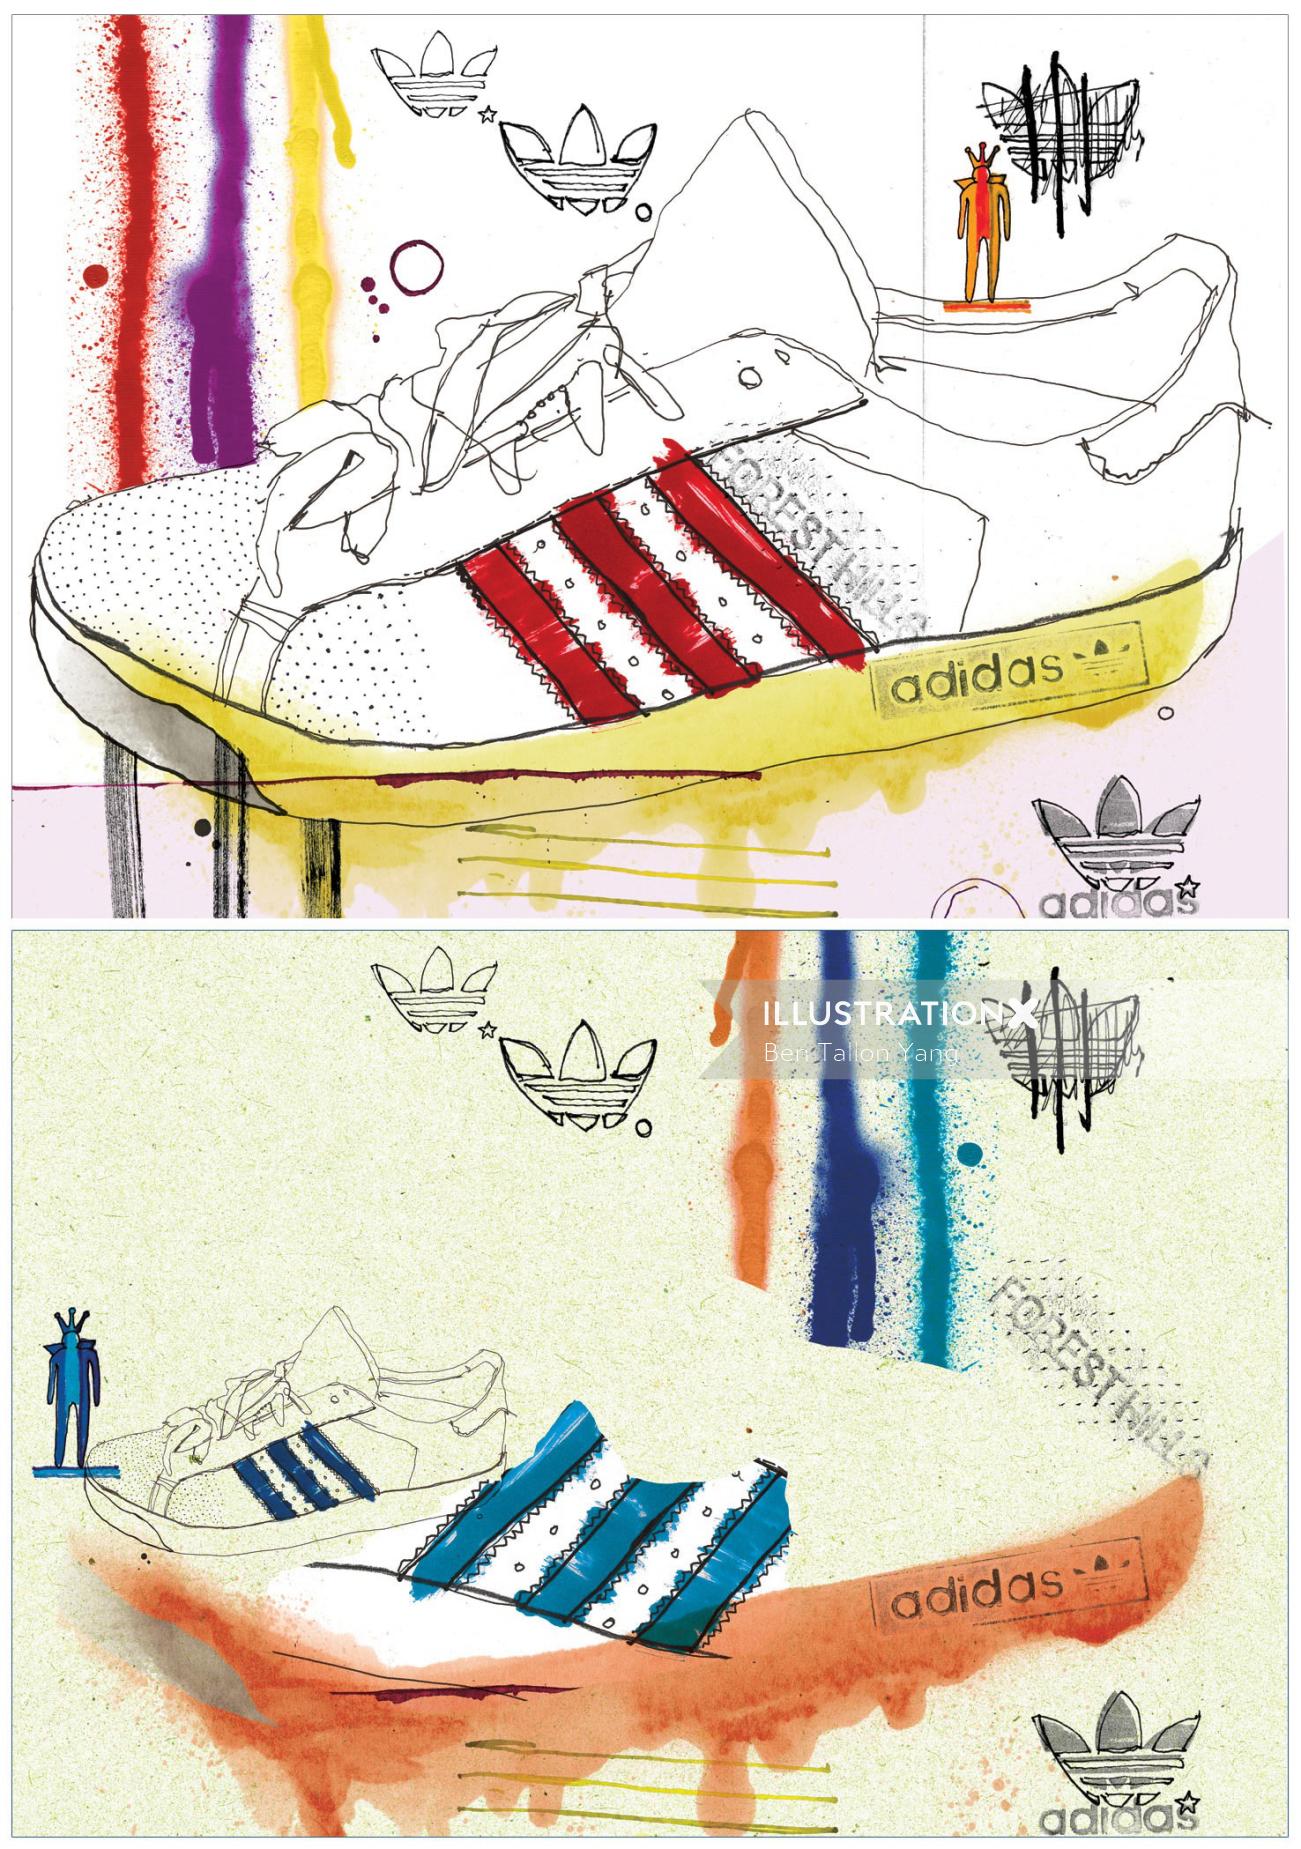 Sketch of a Trendy Pair of Adidas Shoes